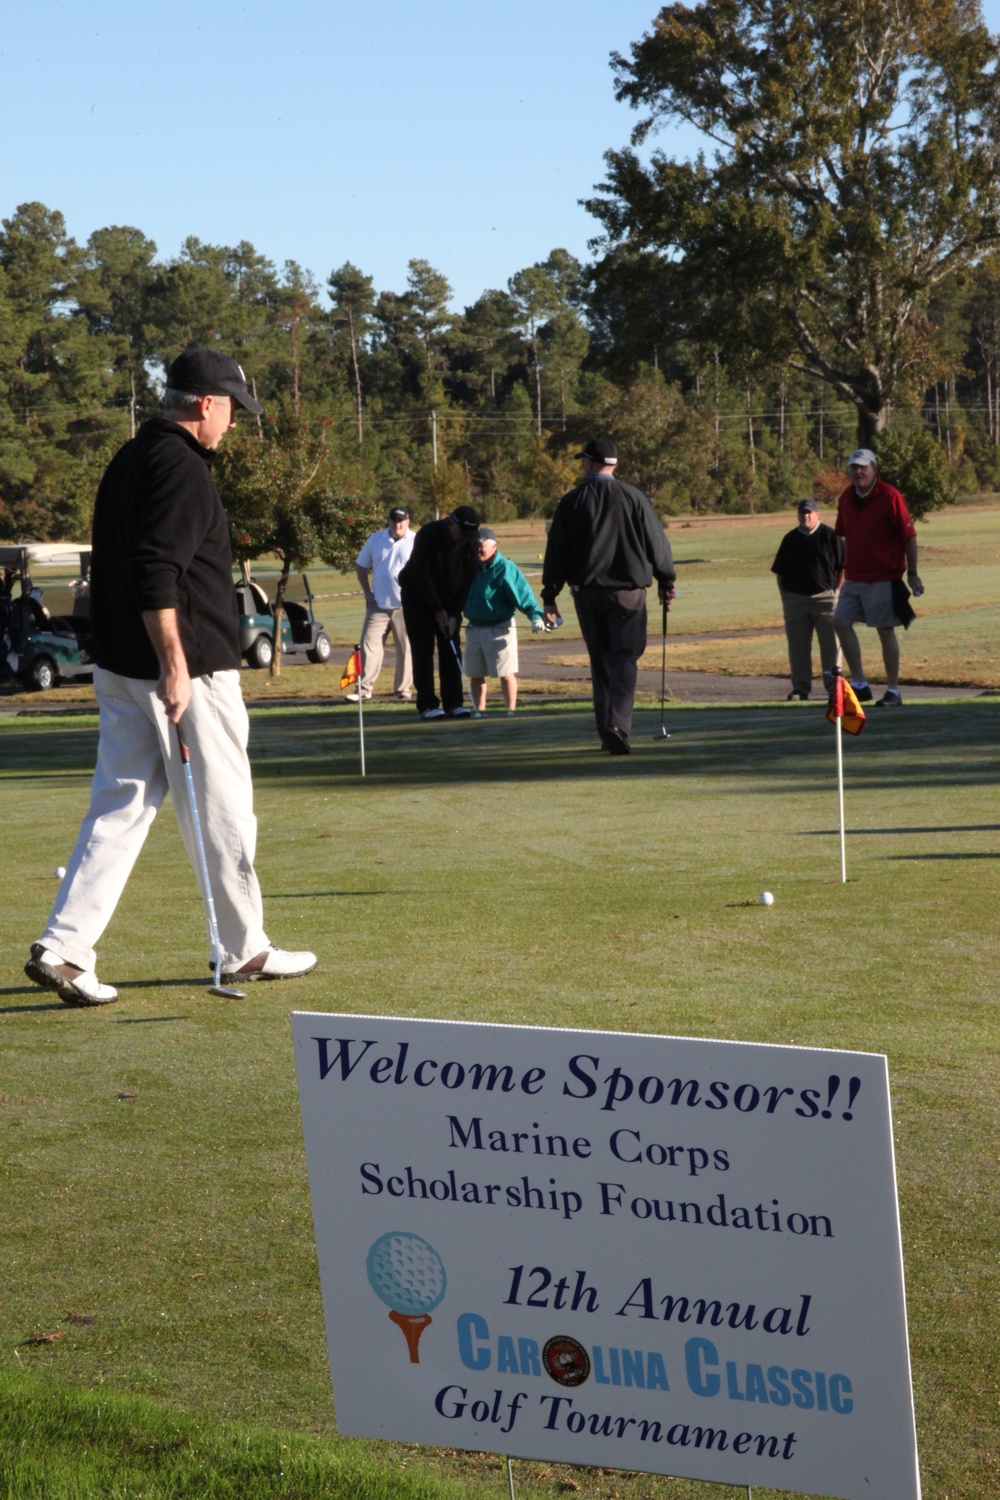 Golfers swing for good cause: Marine Corps Scholarship Foundation holds 12th annual tournament